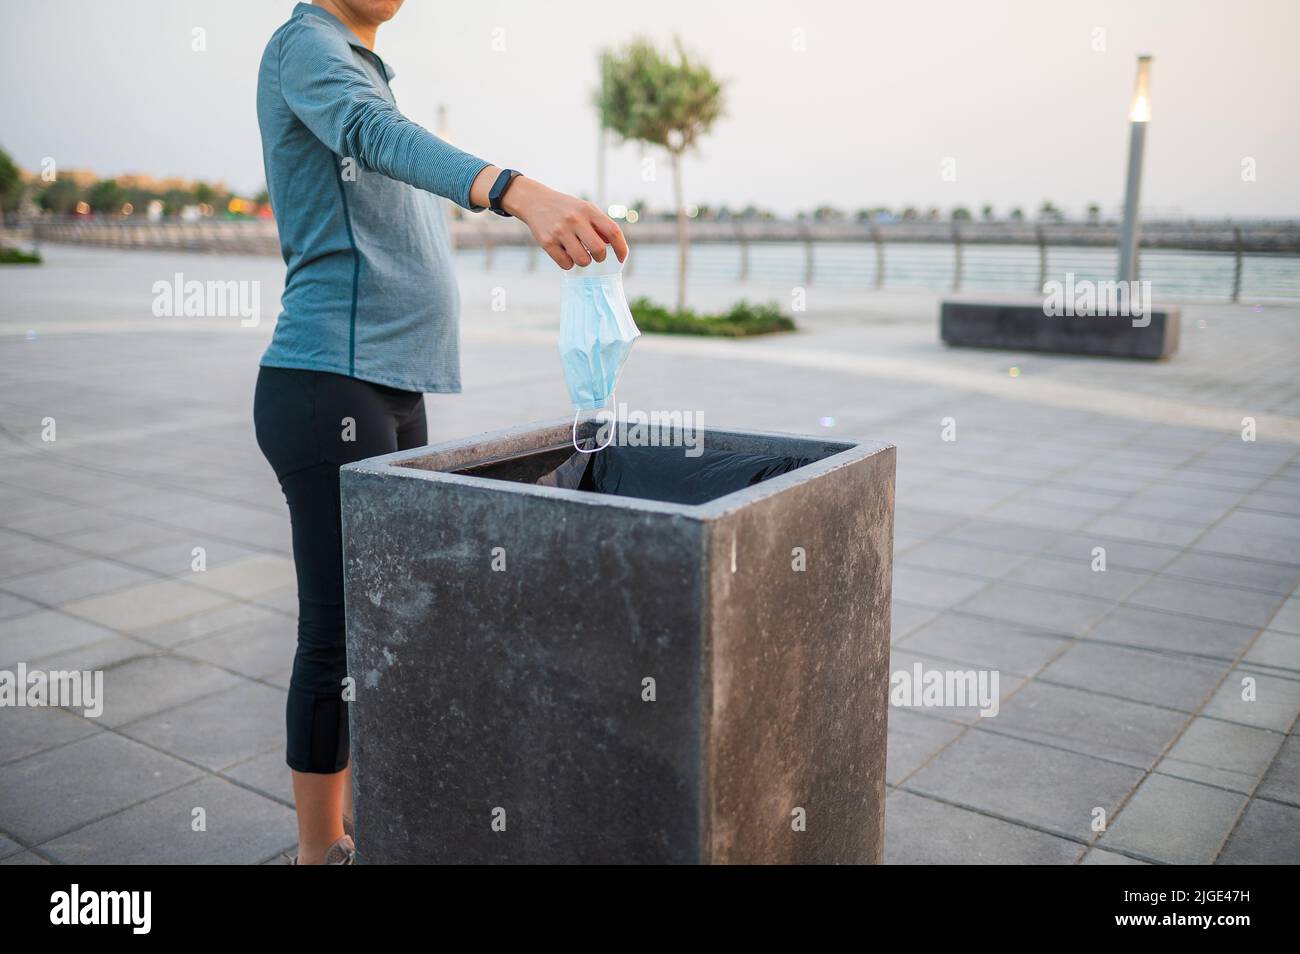 Unrecognizable pregnant woman throwing a used surgical medical face mask in the garbage bin outdoors Stock Photo